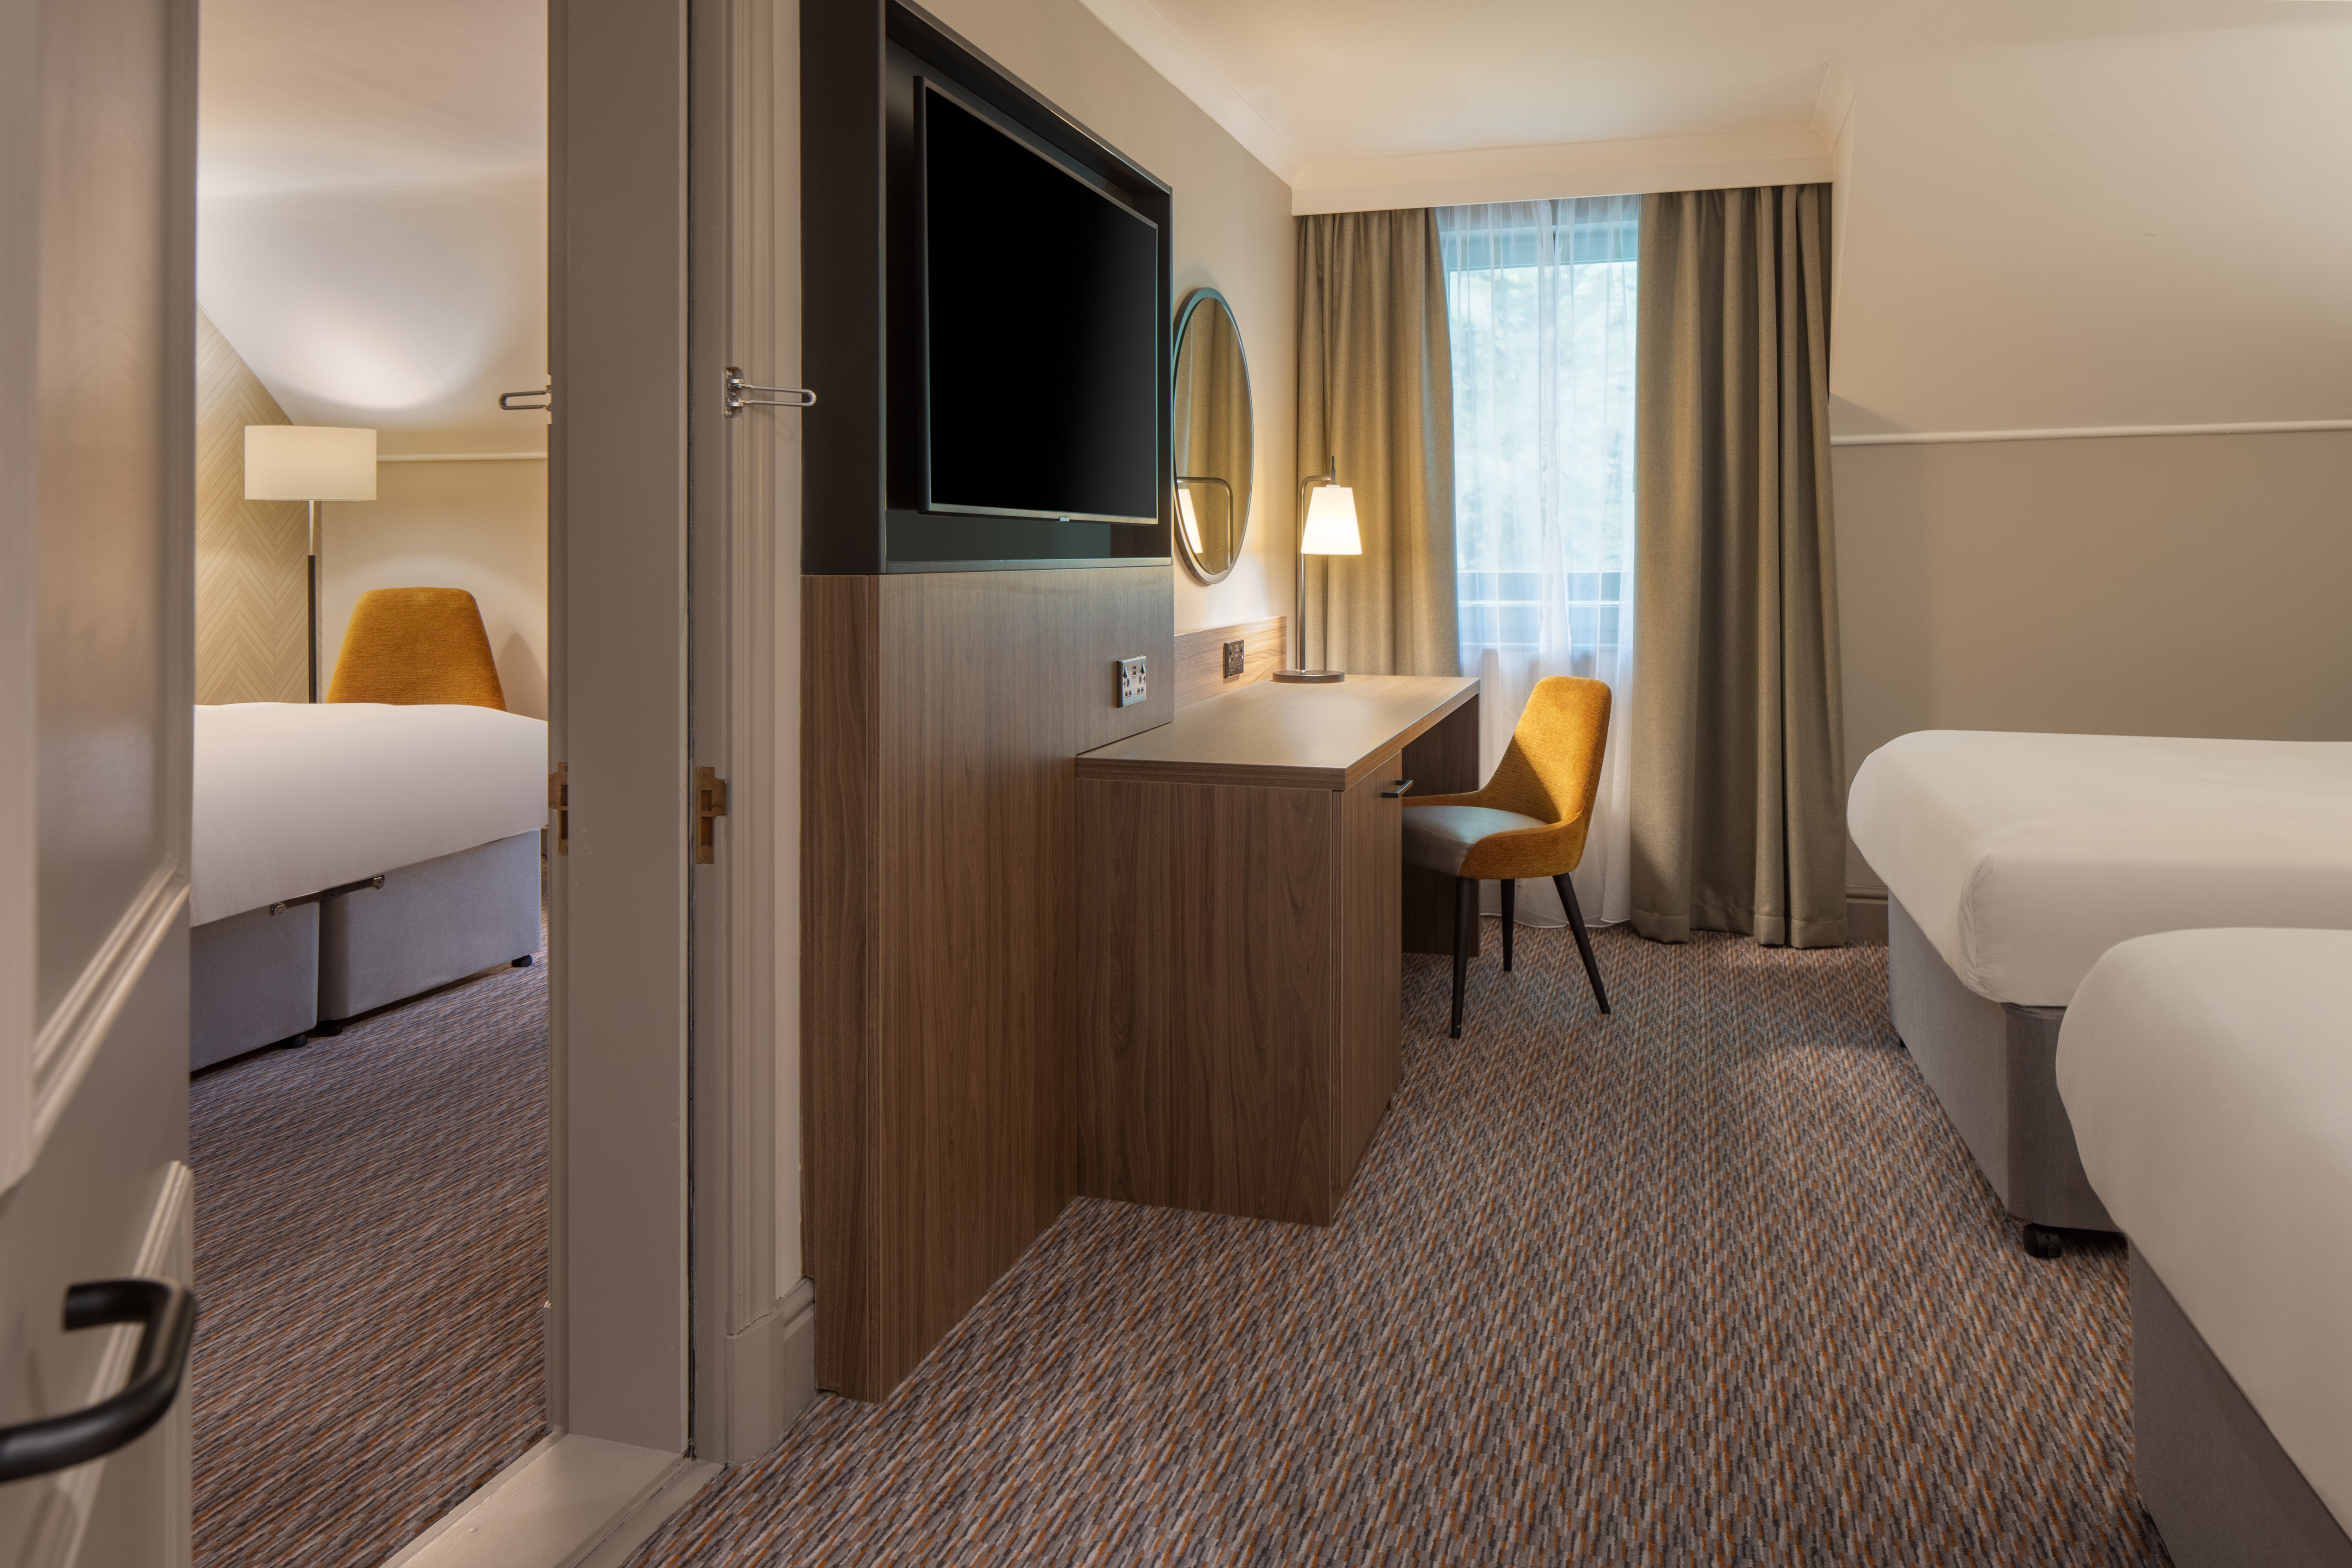 connection between guest rooms